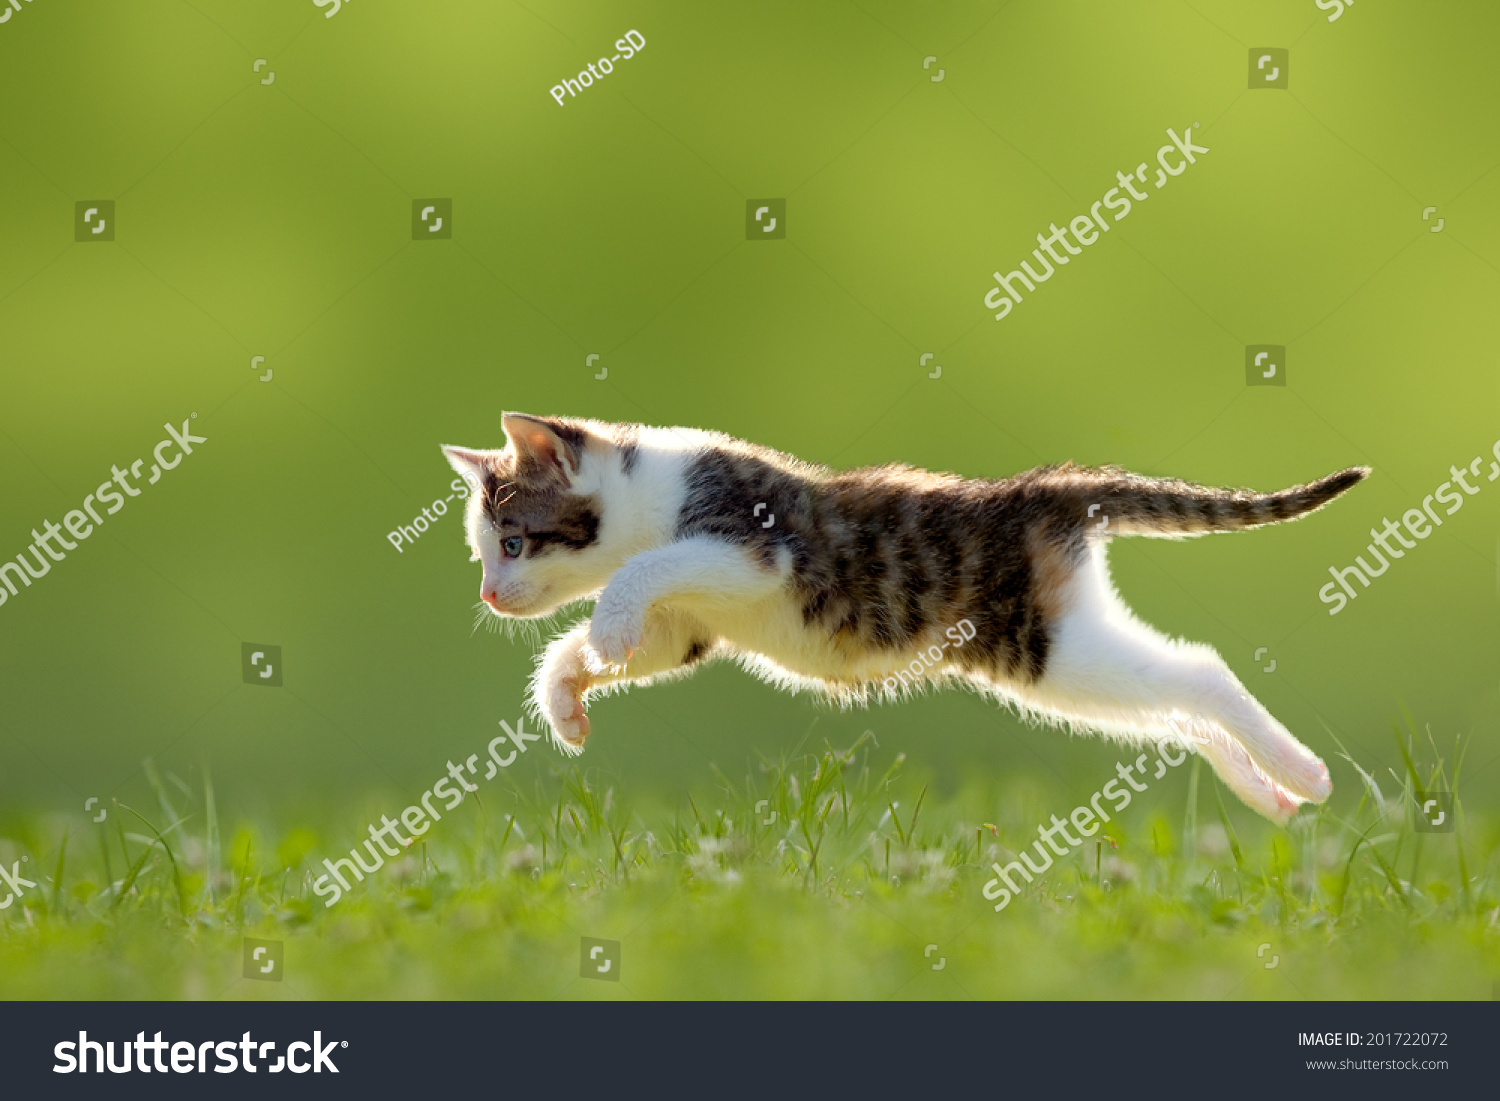 Young cat jumps over a meadow in the backlit #201722072